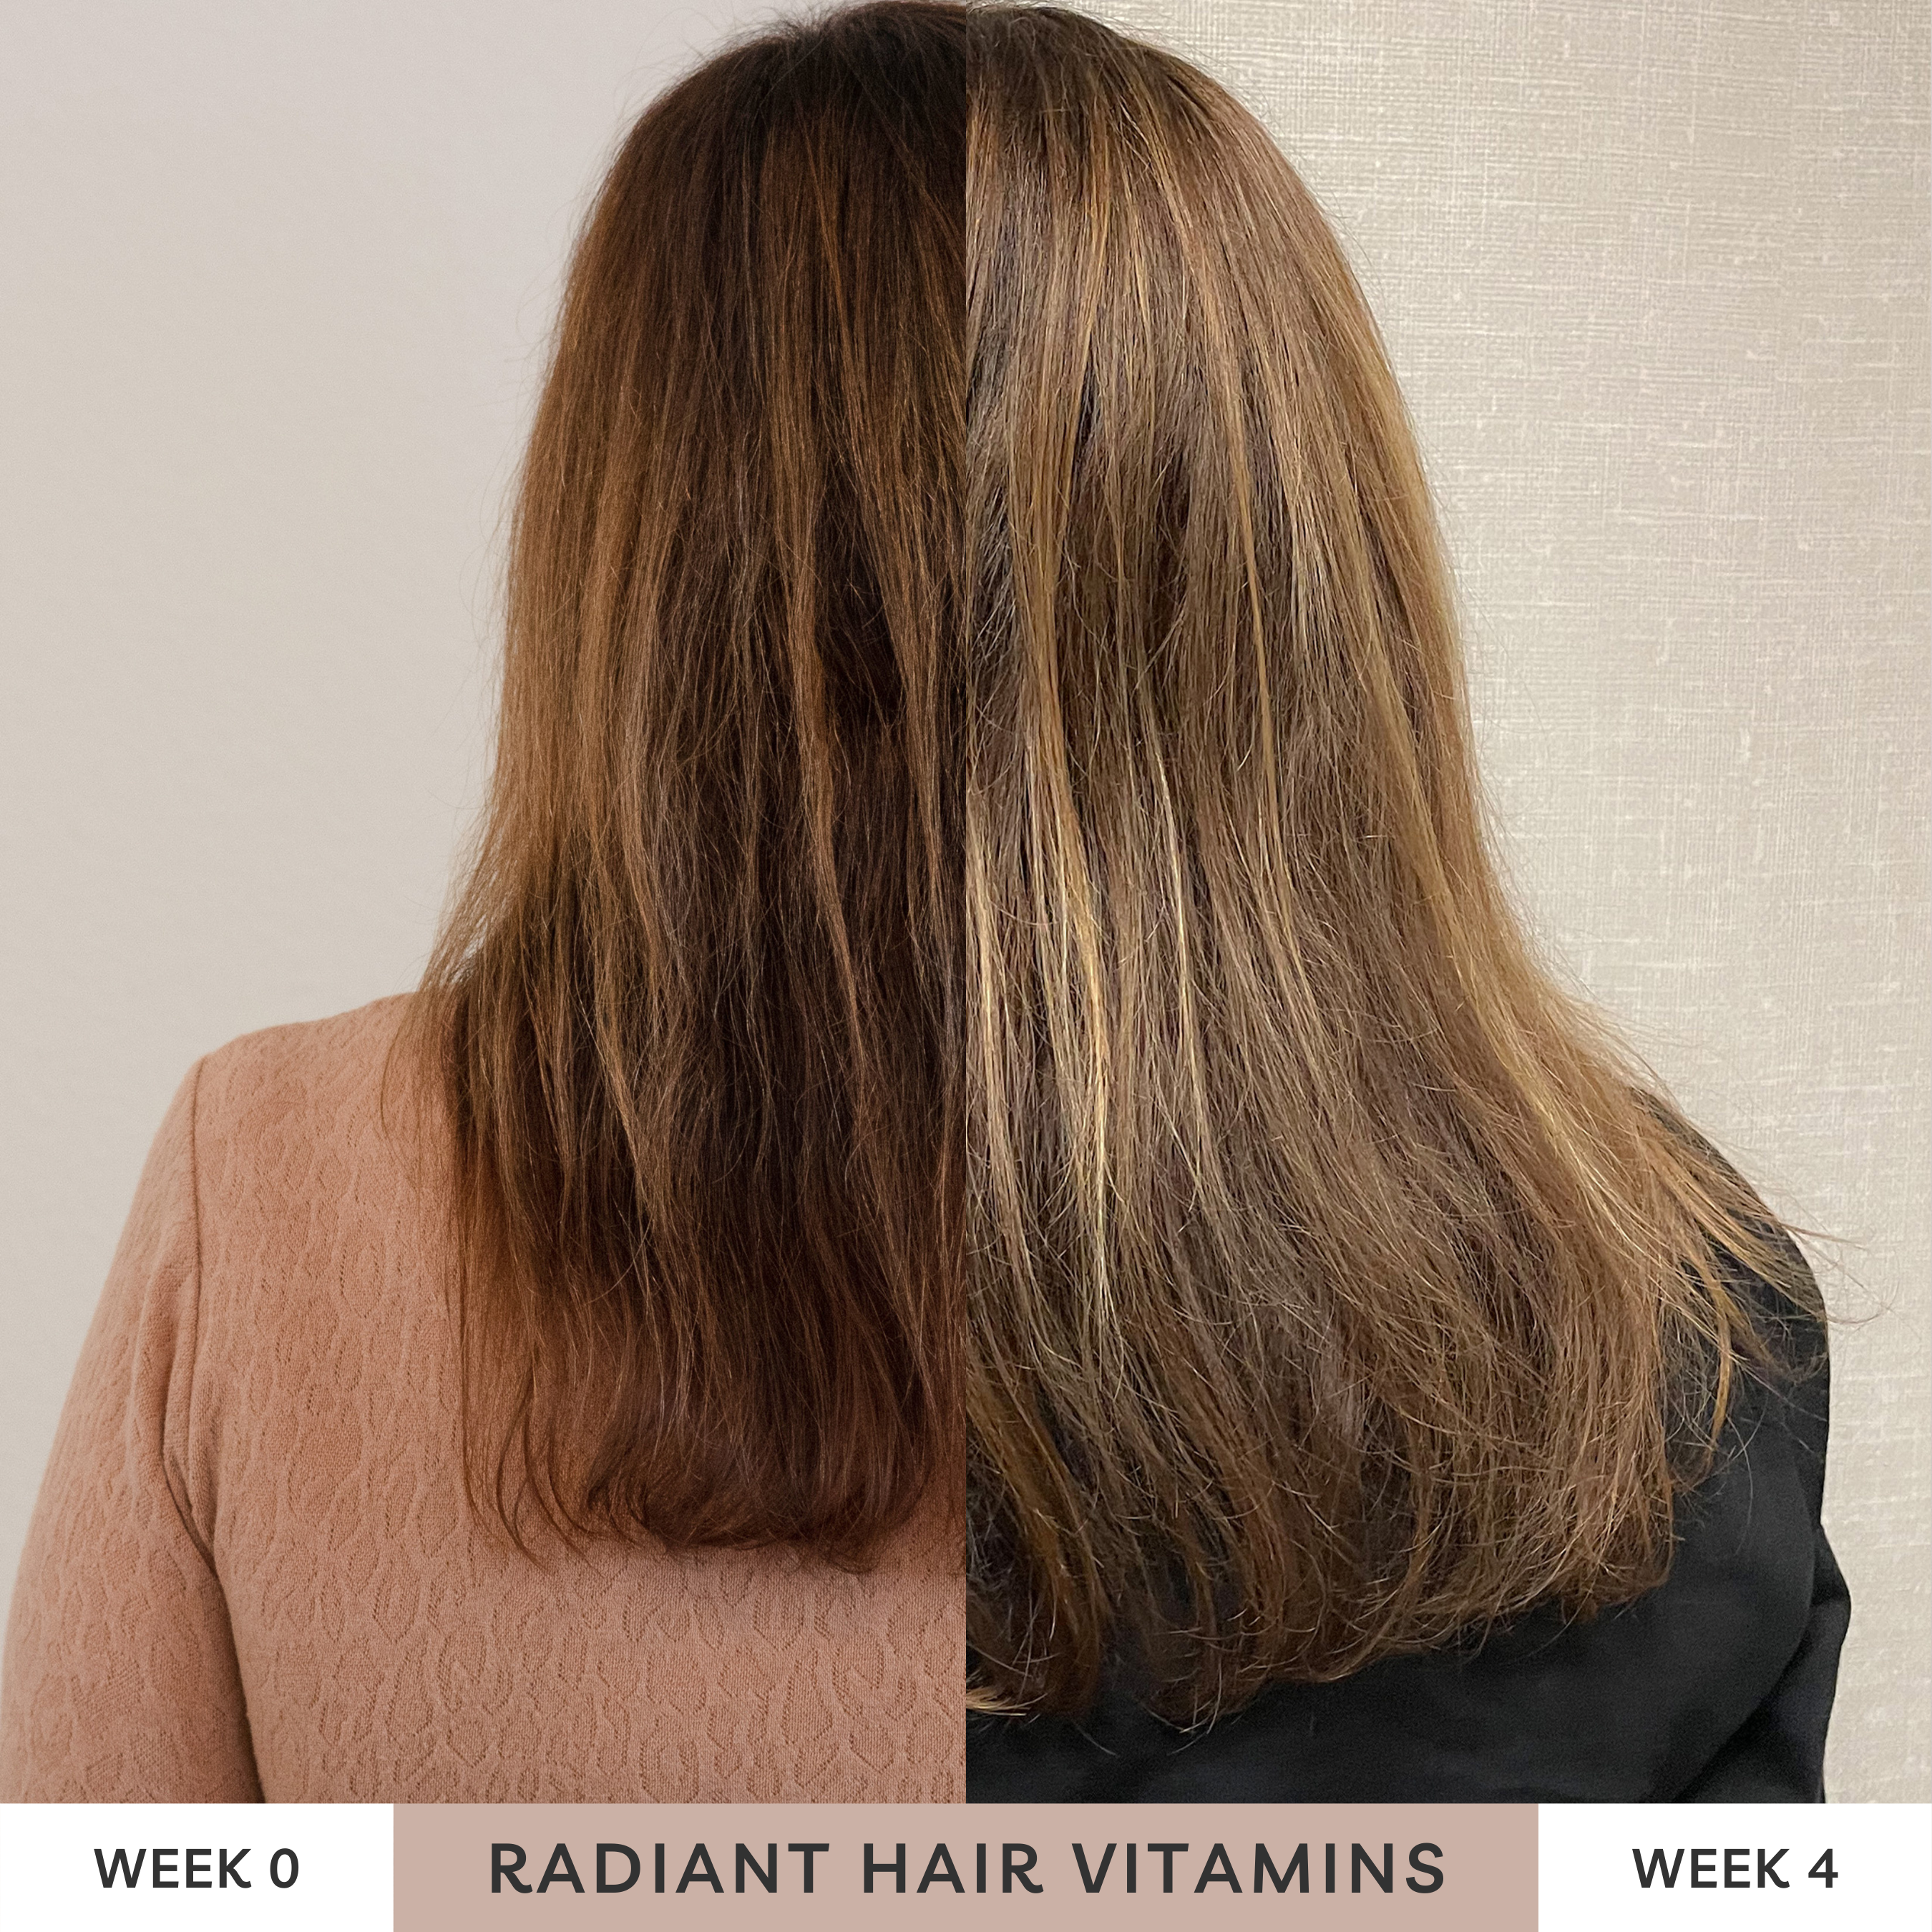 Real results for radiant hair vitamins